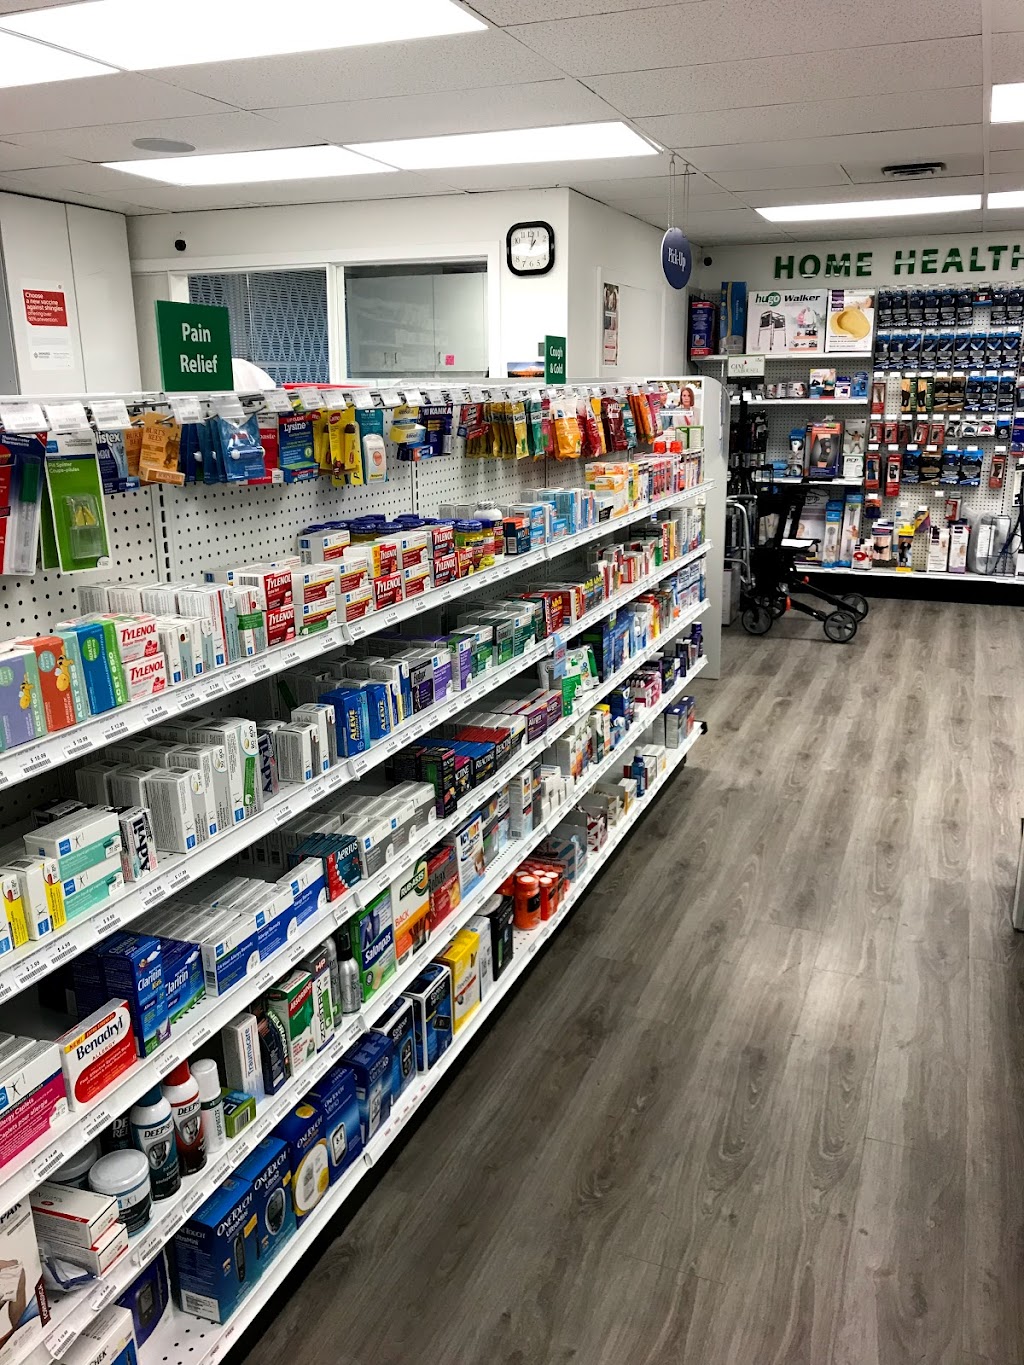 Brookswood RemedysRx Pharmacy | health | 20103 40 Ave #100, Langley, BC V3A 2W3, Canada | 6044272140 OR +1 604-427-2140